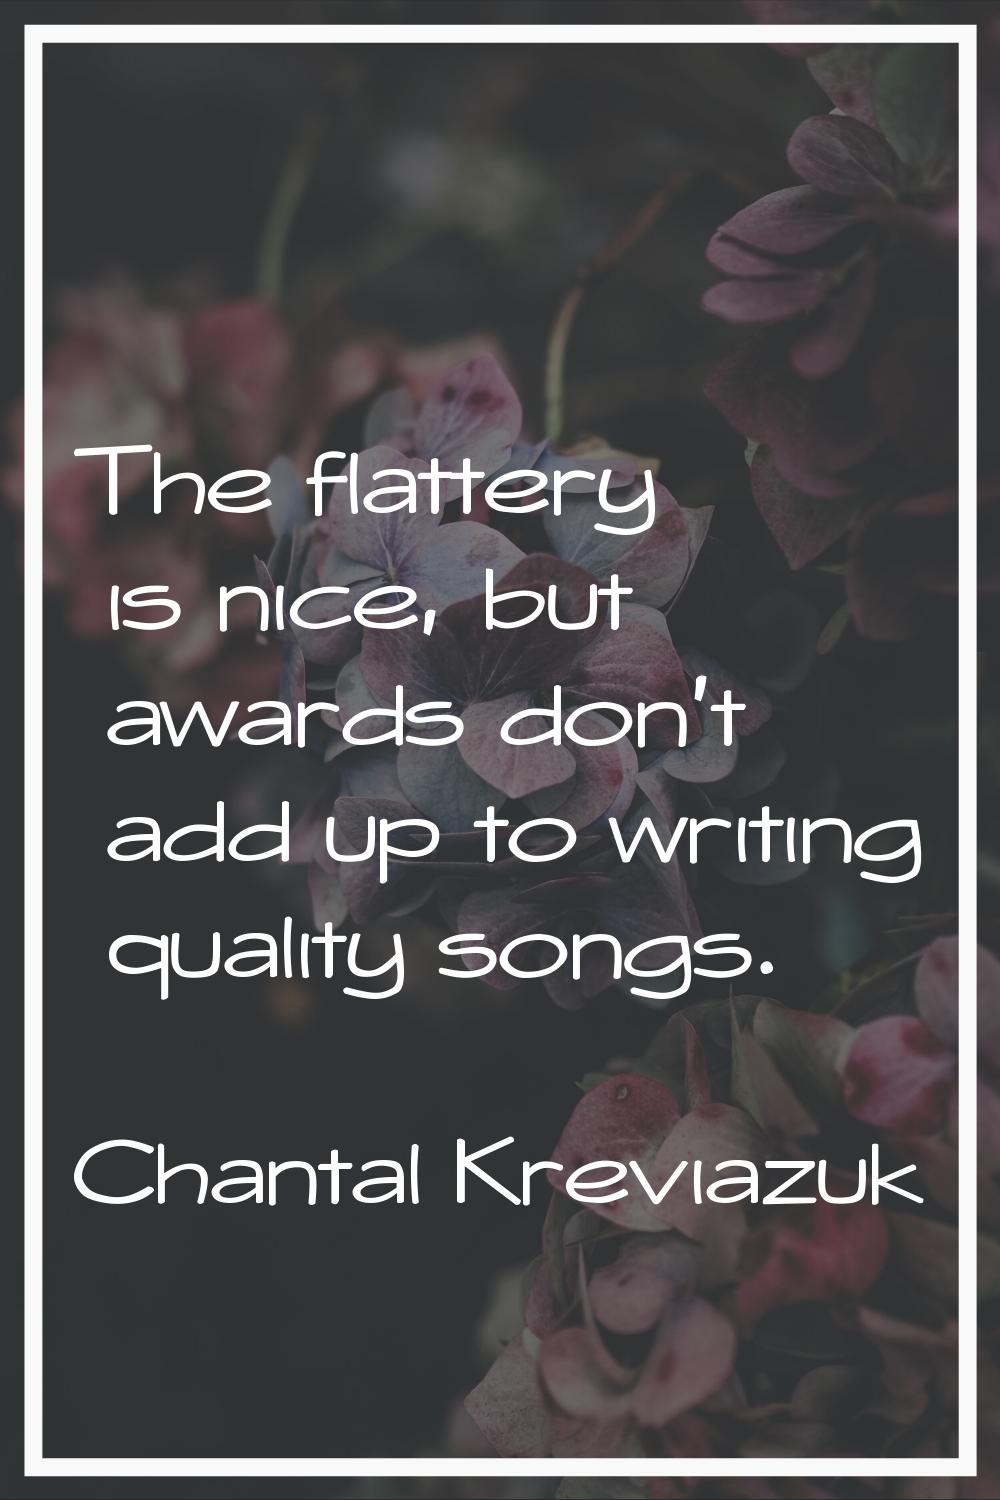 The flattery is nice, but awards don't add up to writing quality songs.